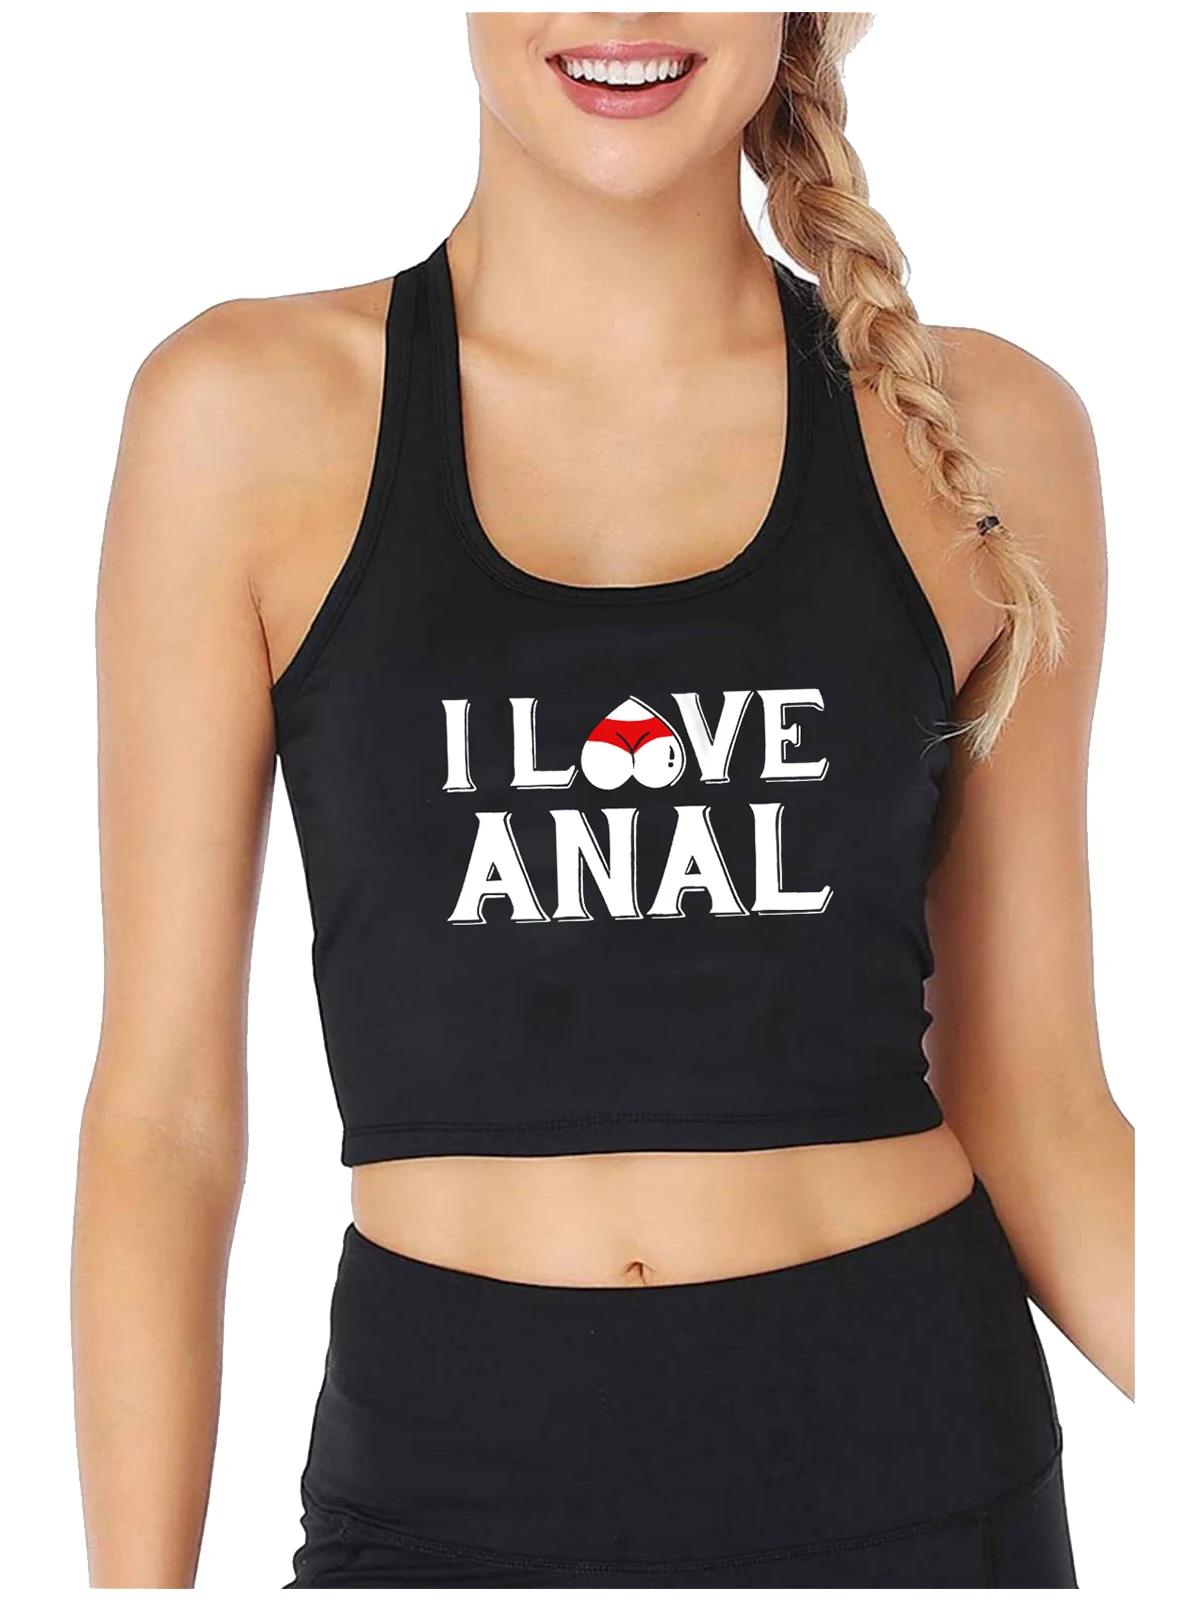 

I Love Anal Design Cotton Sexy Slim Fit Crop Top Hotwife Humorous Flirtation Style Tank Tops Swinger Naughty Seductive Camisole